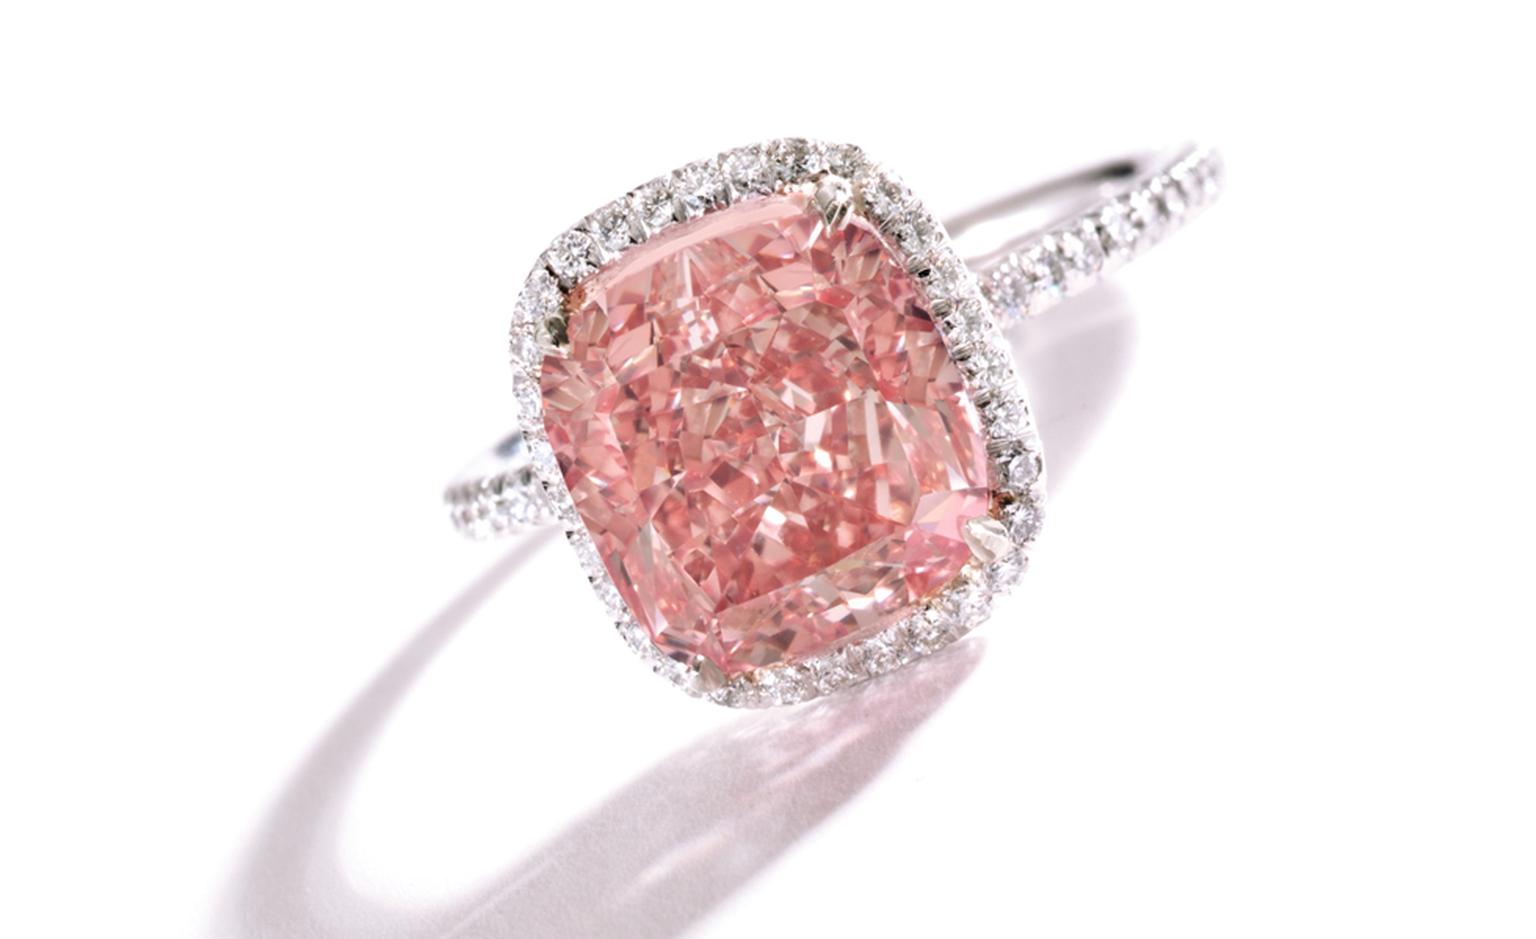 Lot 337 A Magnificent and Rare Fancy Vivid Pink Diamond Ring Est. $1.5/2 million. SOLD FOR $1,874,500